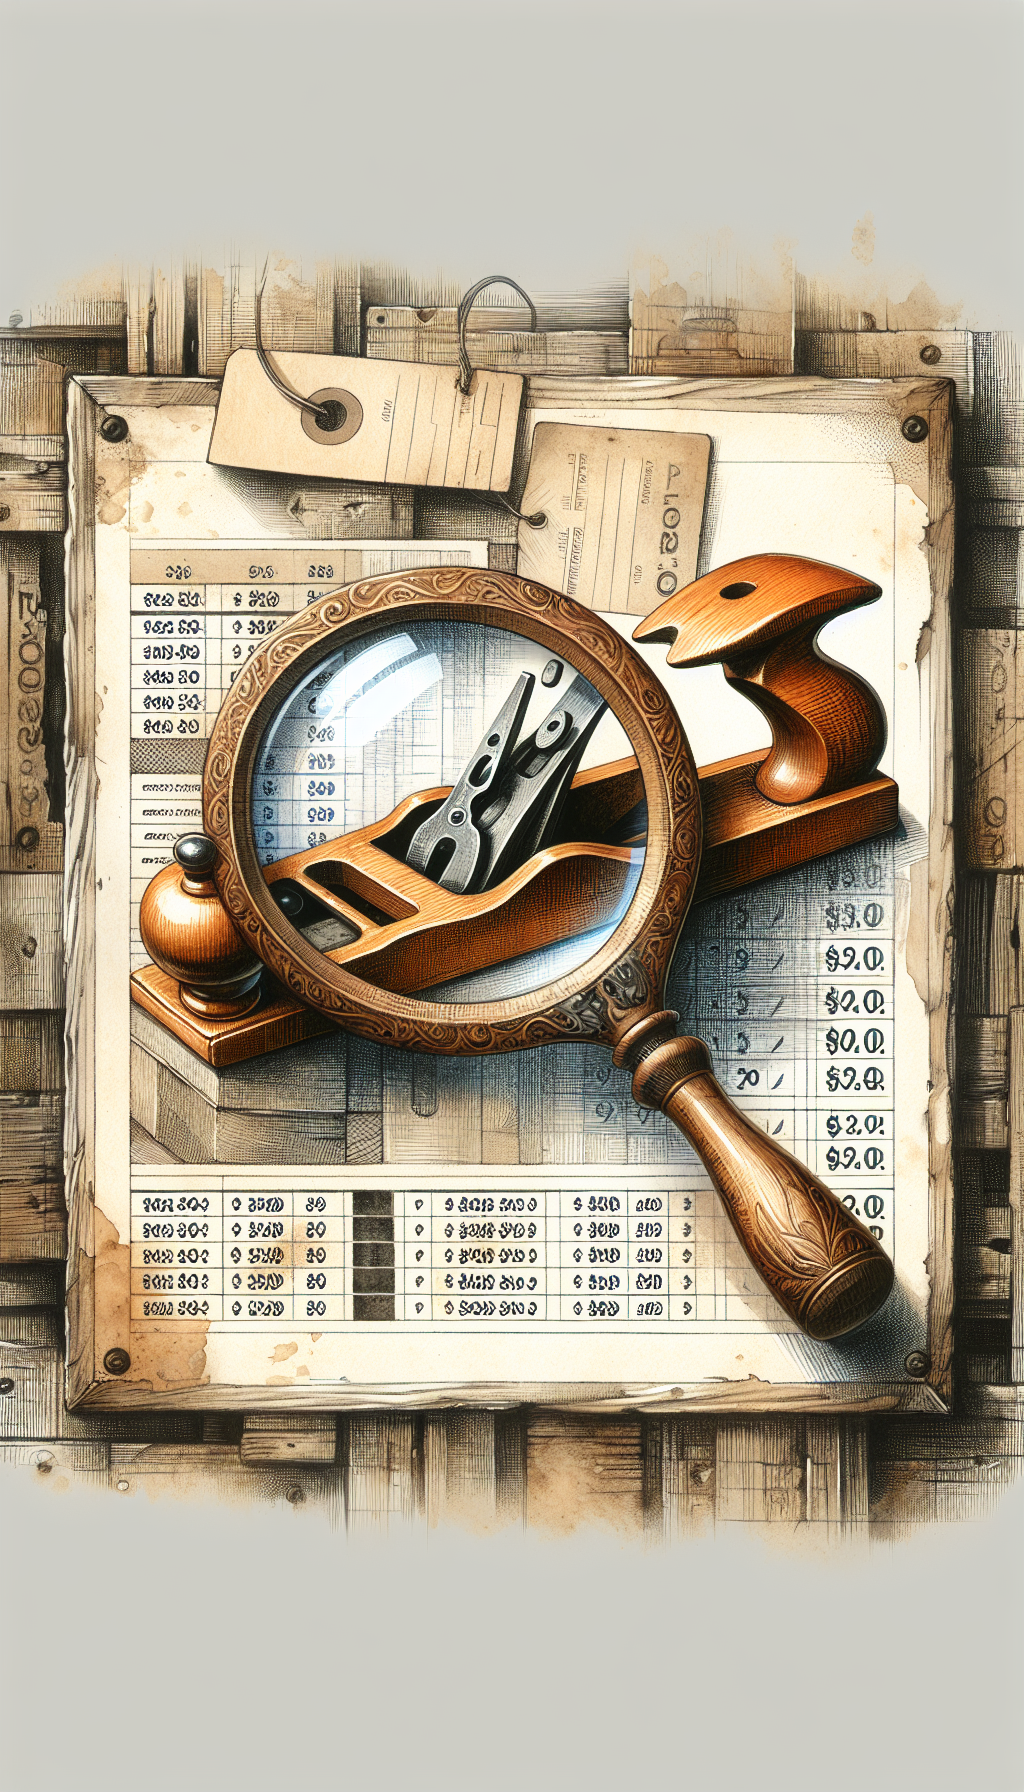 An illustration of an intricately carved wooden magnifying glass, with its lens focusing on a classic, well-worn hand plane, highlighting intricate details and patina, suggesting the evaluation of craftsmanship on antique tools. Faint price tags with increasing figures hang from various tools in the background, emphasizing the correlation between quality and value, drawn in a blend of watercolor and fine-line styles.